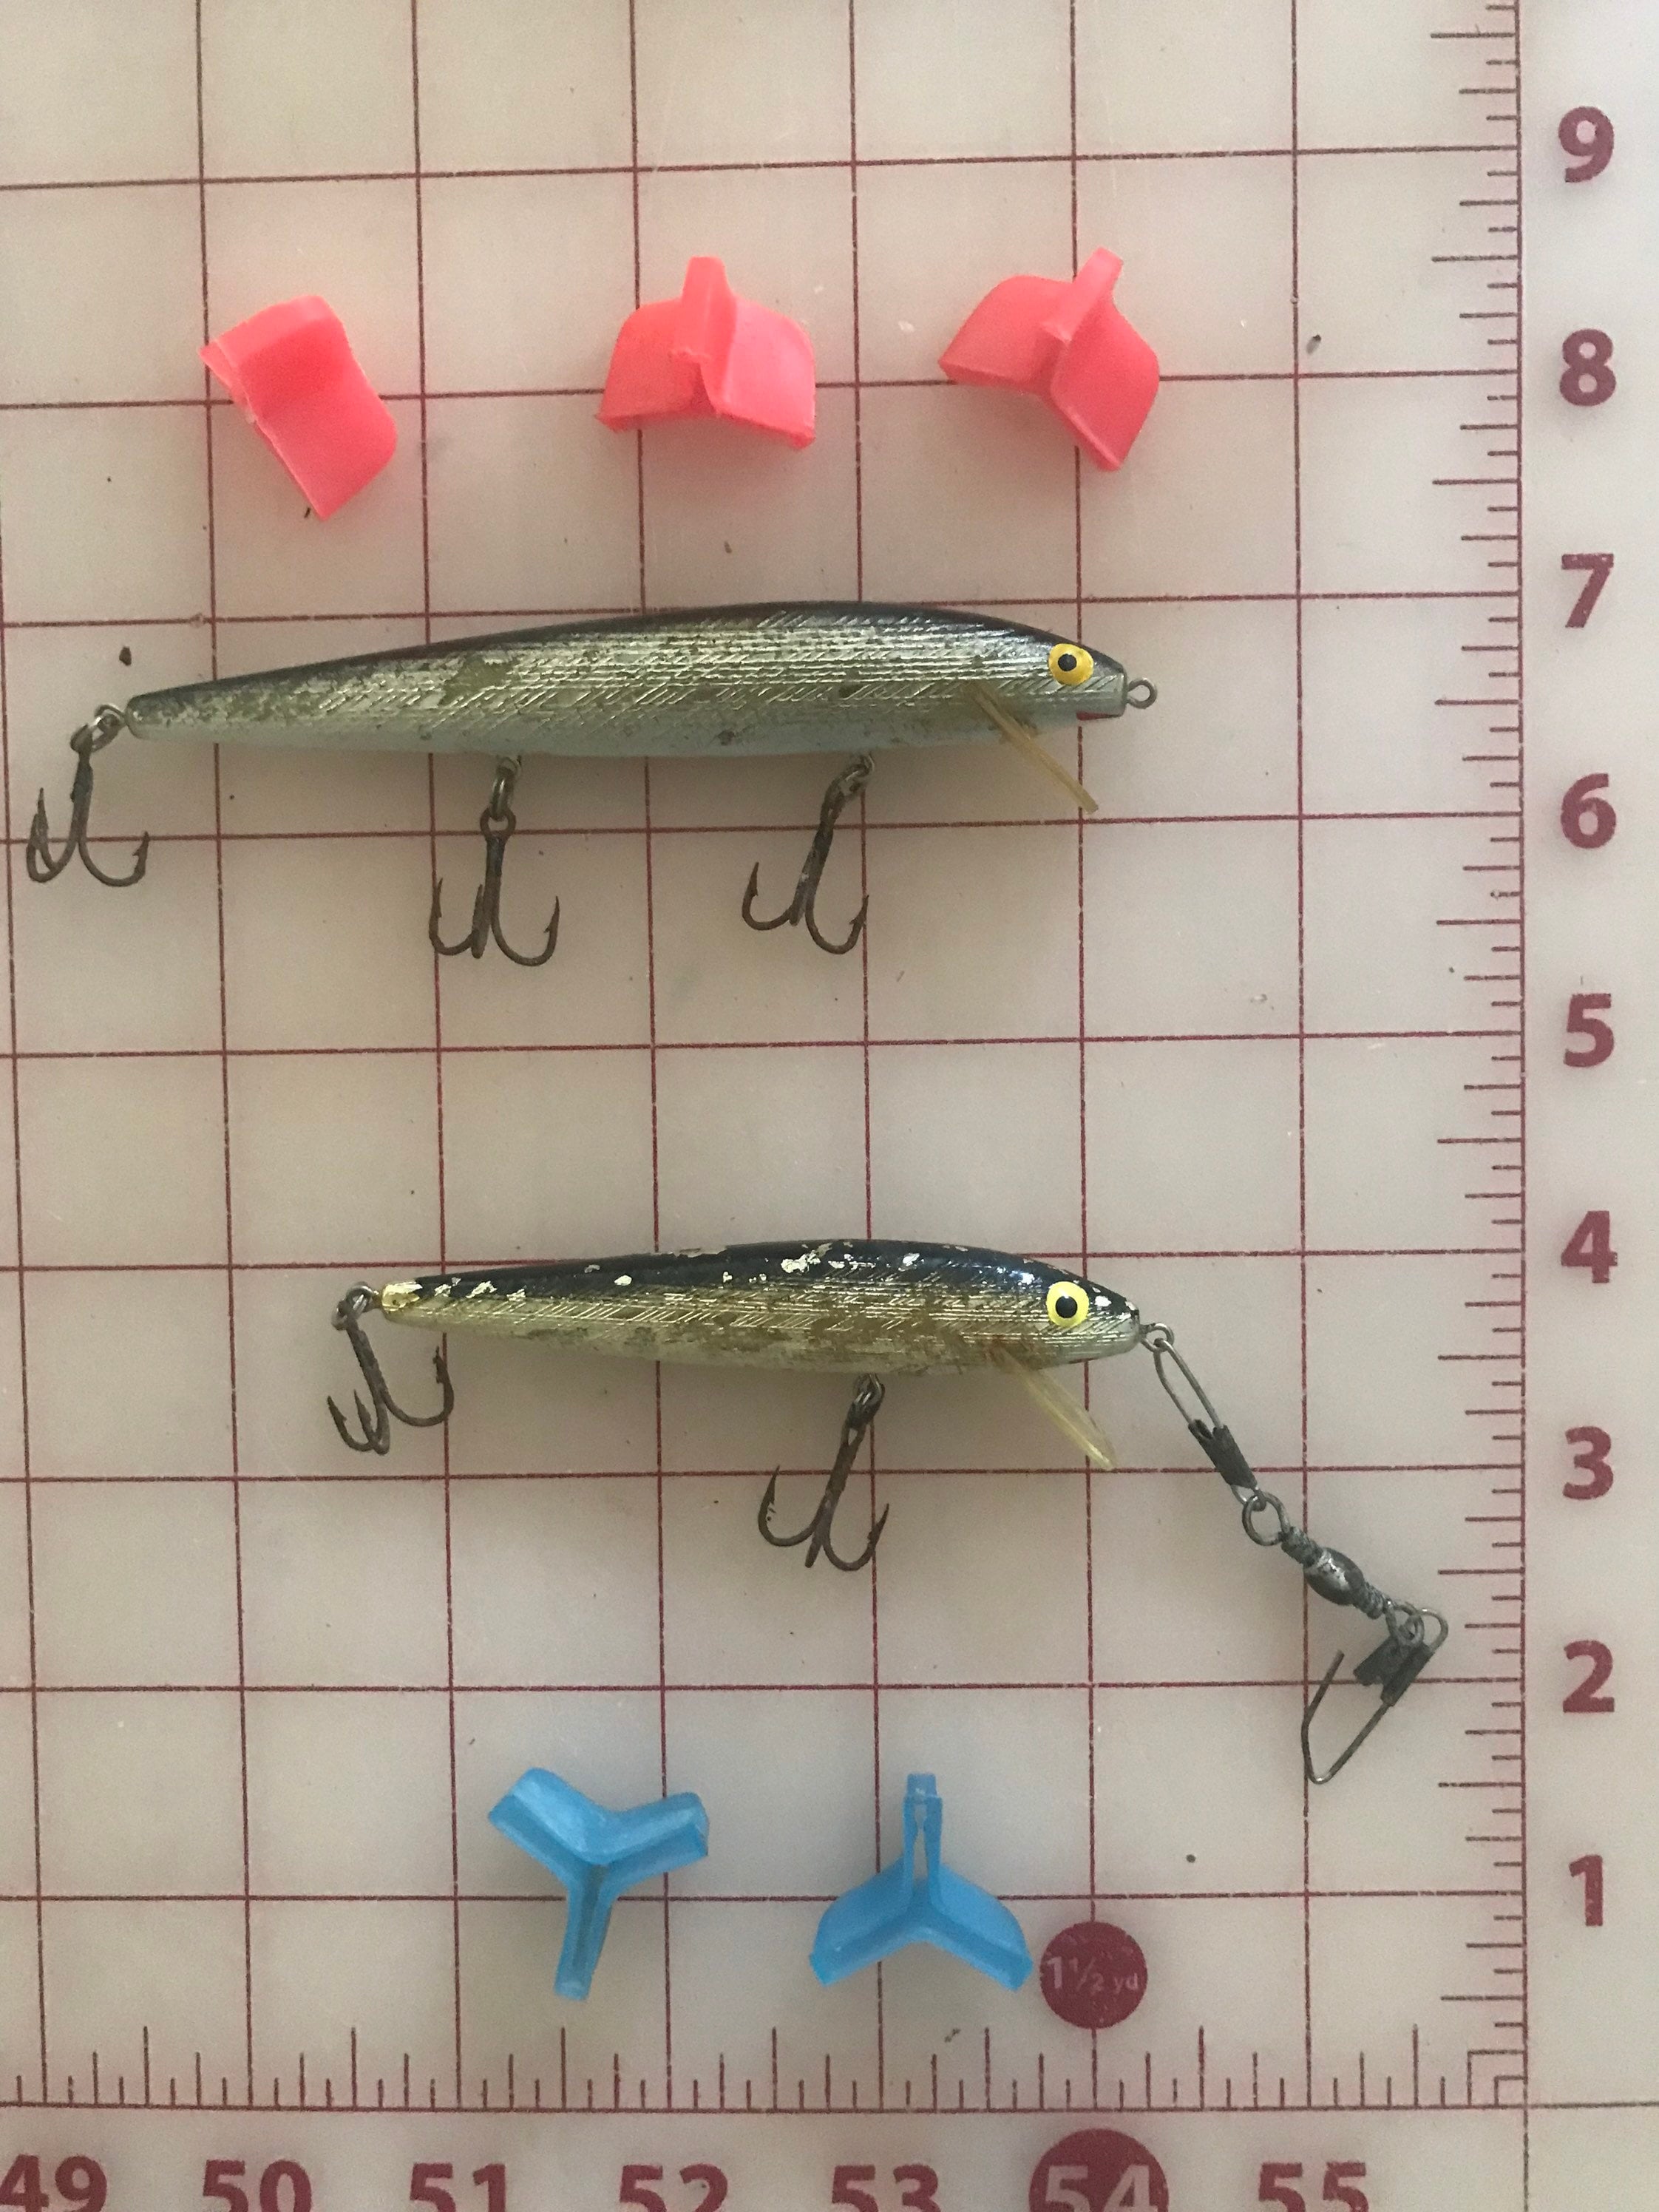 Vintage 1950s 1960s Floating Minnow Fishing Lures Rapala Shiny